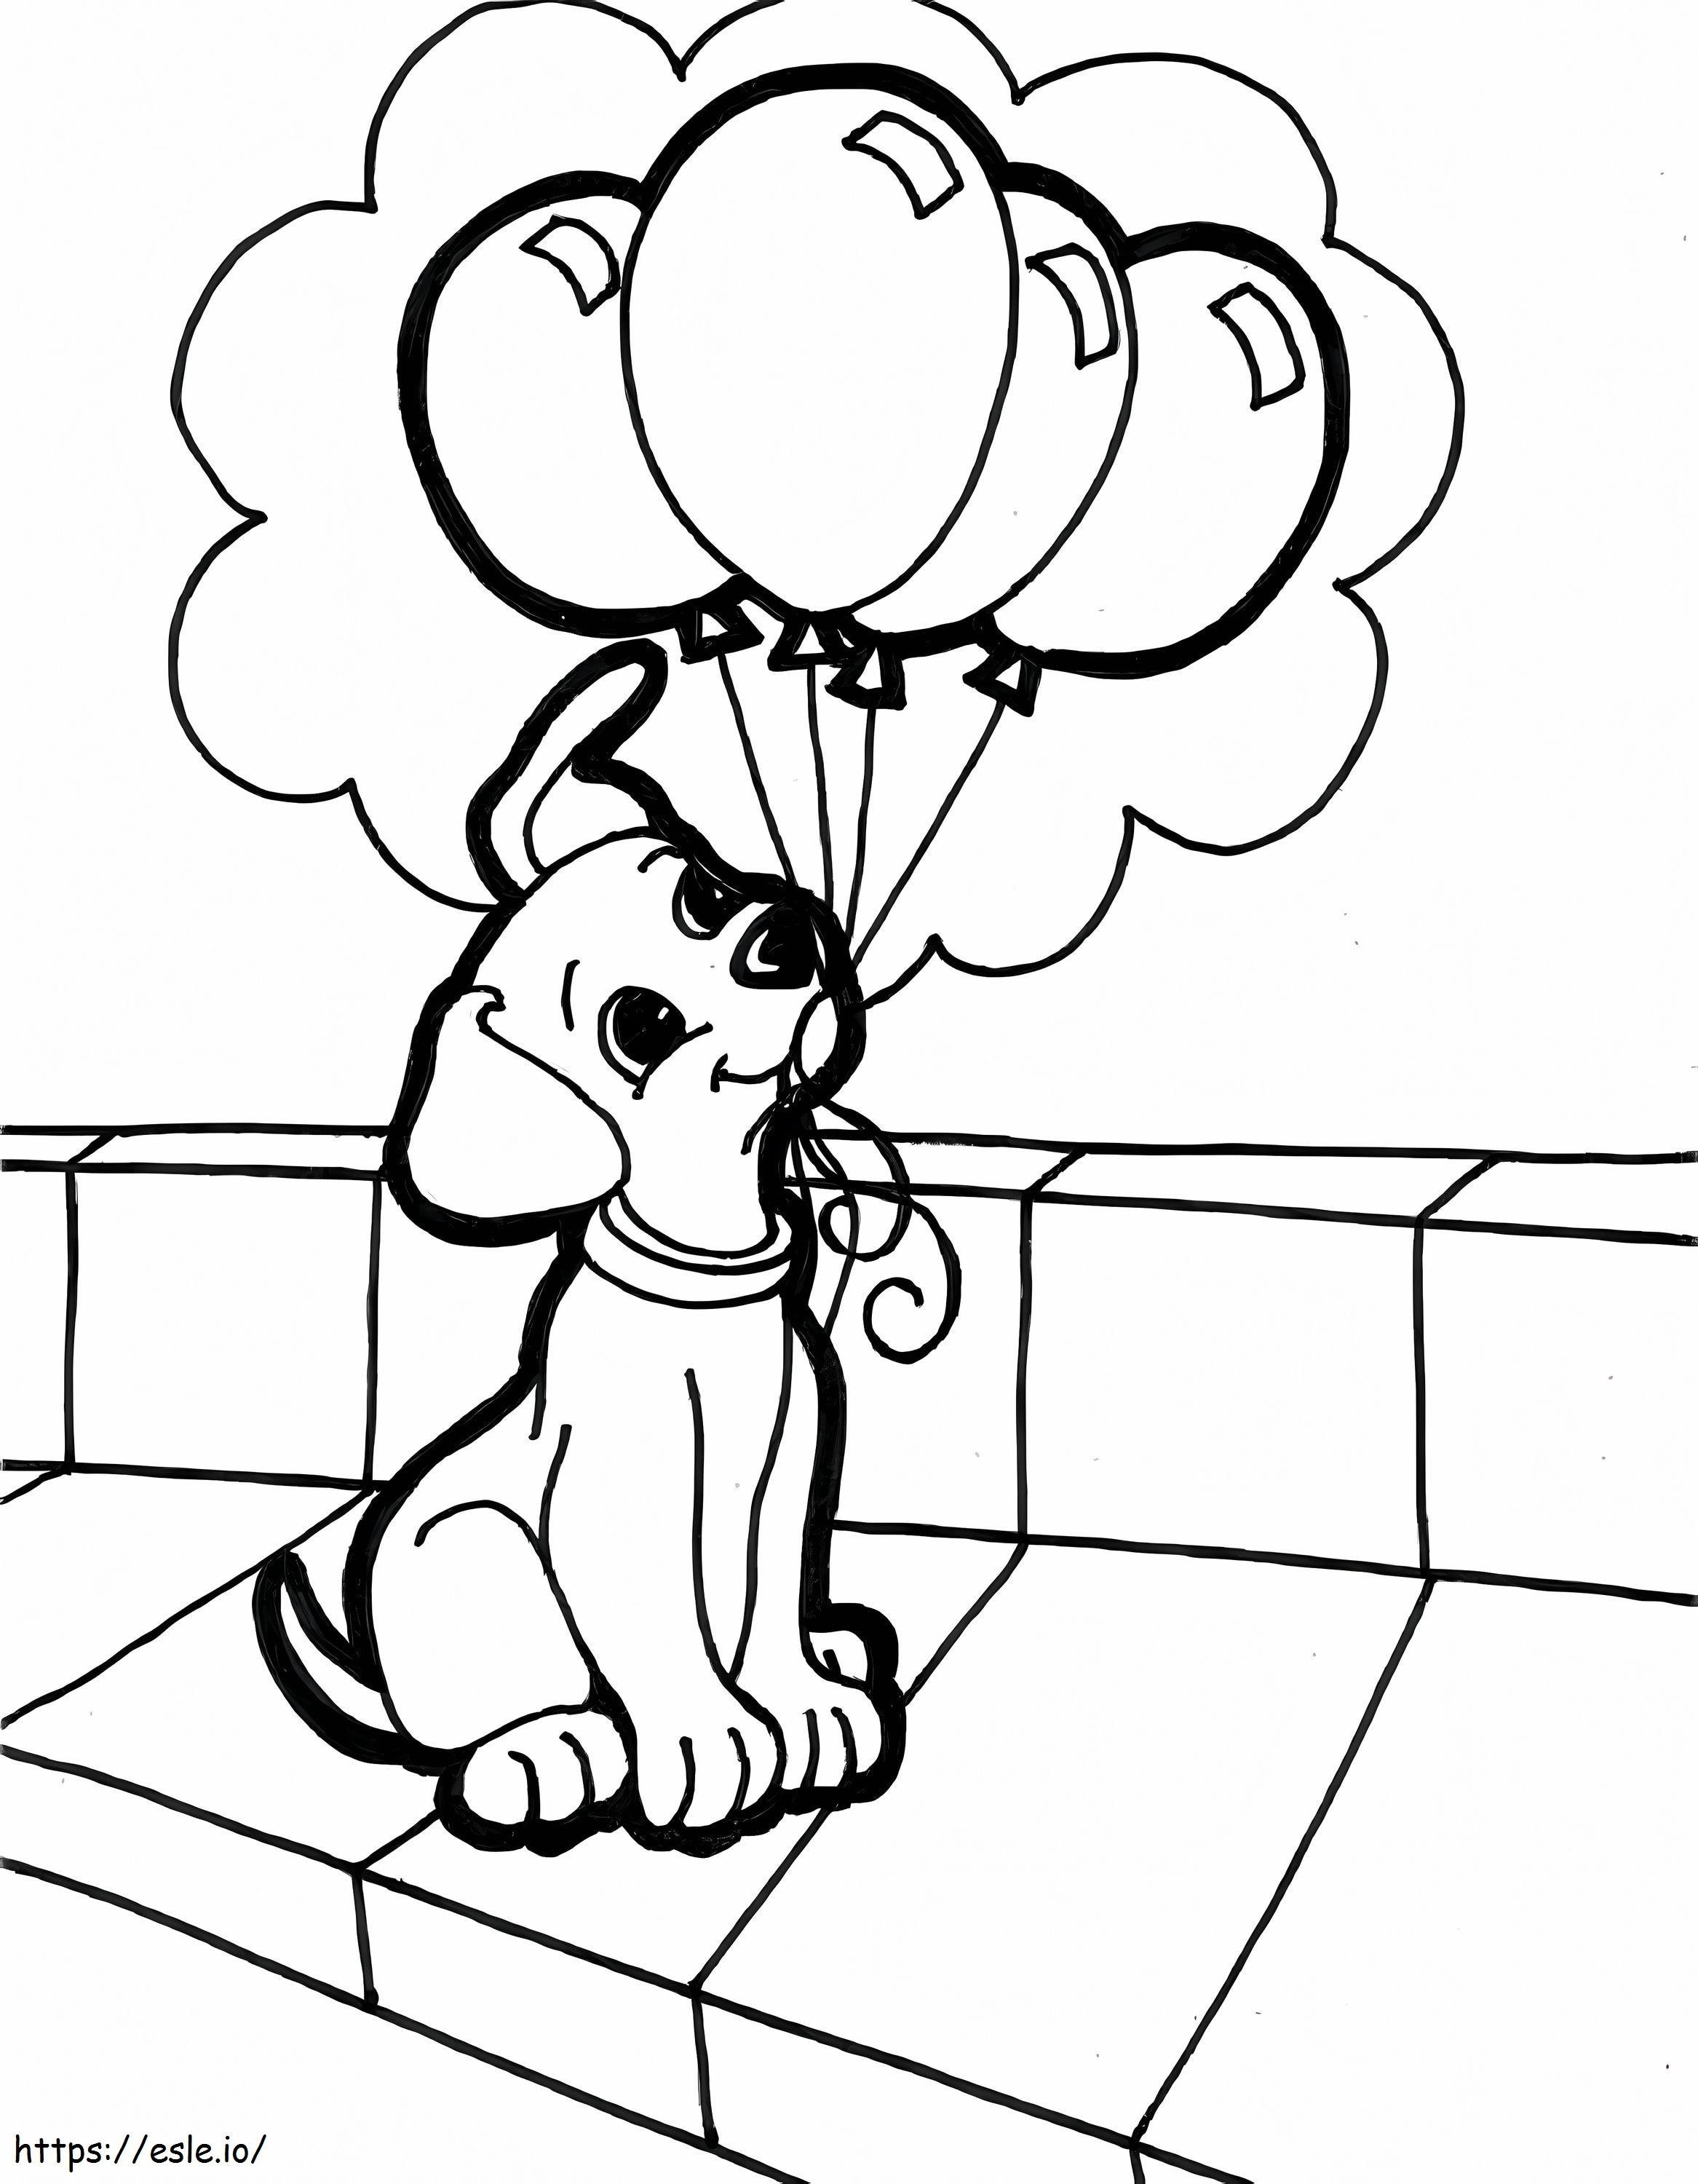 Dog Holding Balloons coloring page